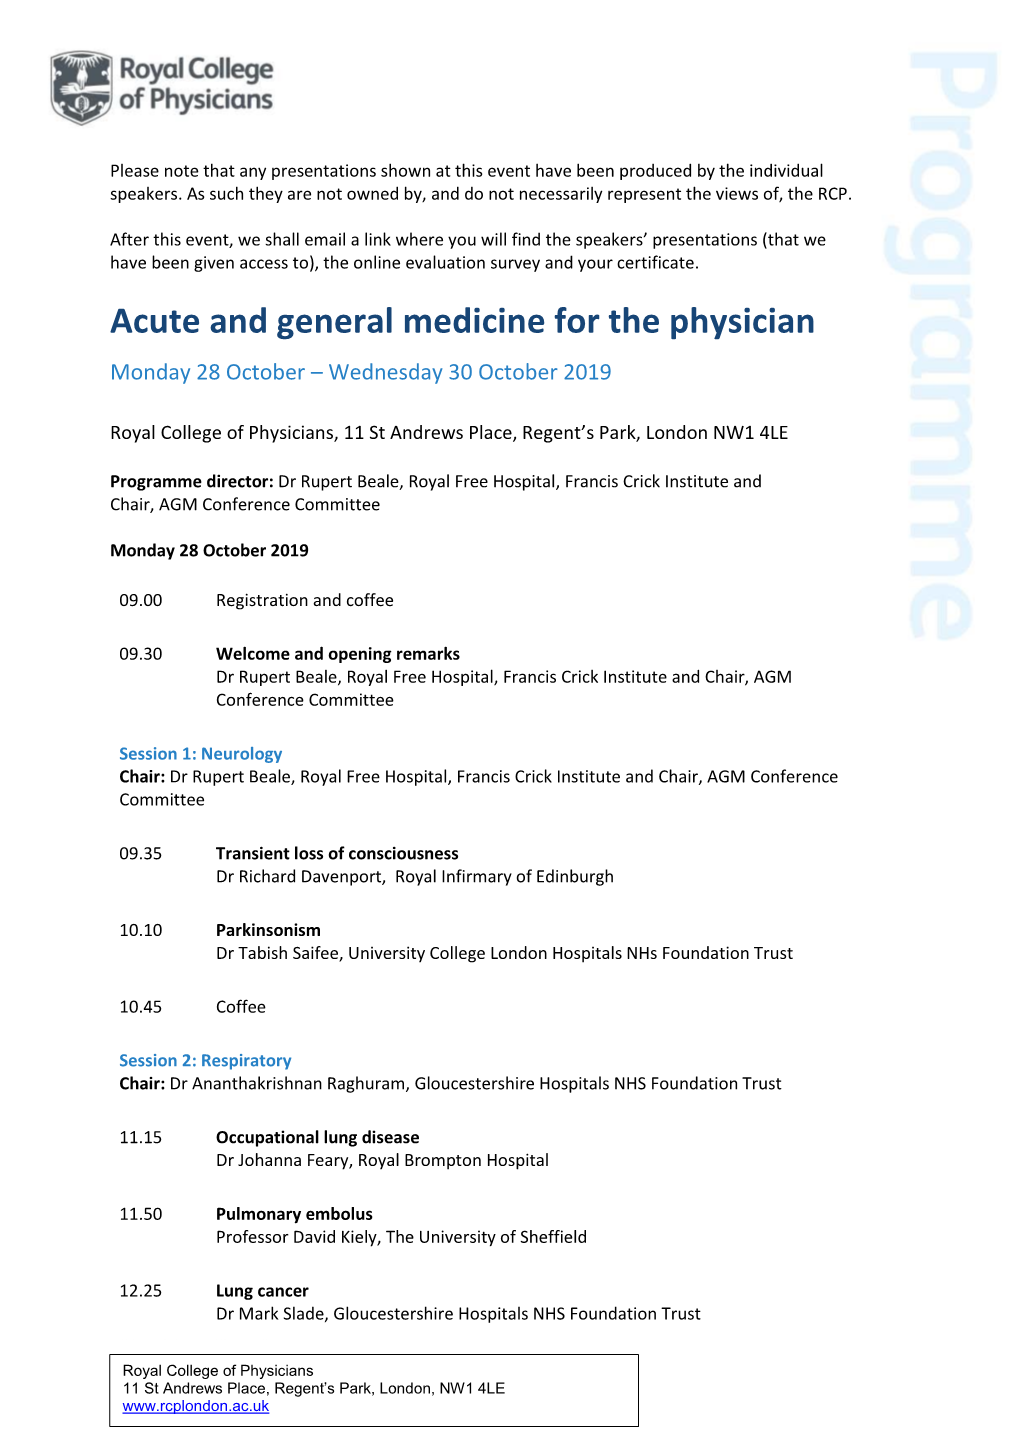 Acute and General Medicine for the Physician Monday 28 October – Wednesday 30 October 2019